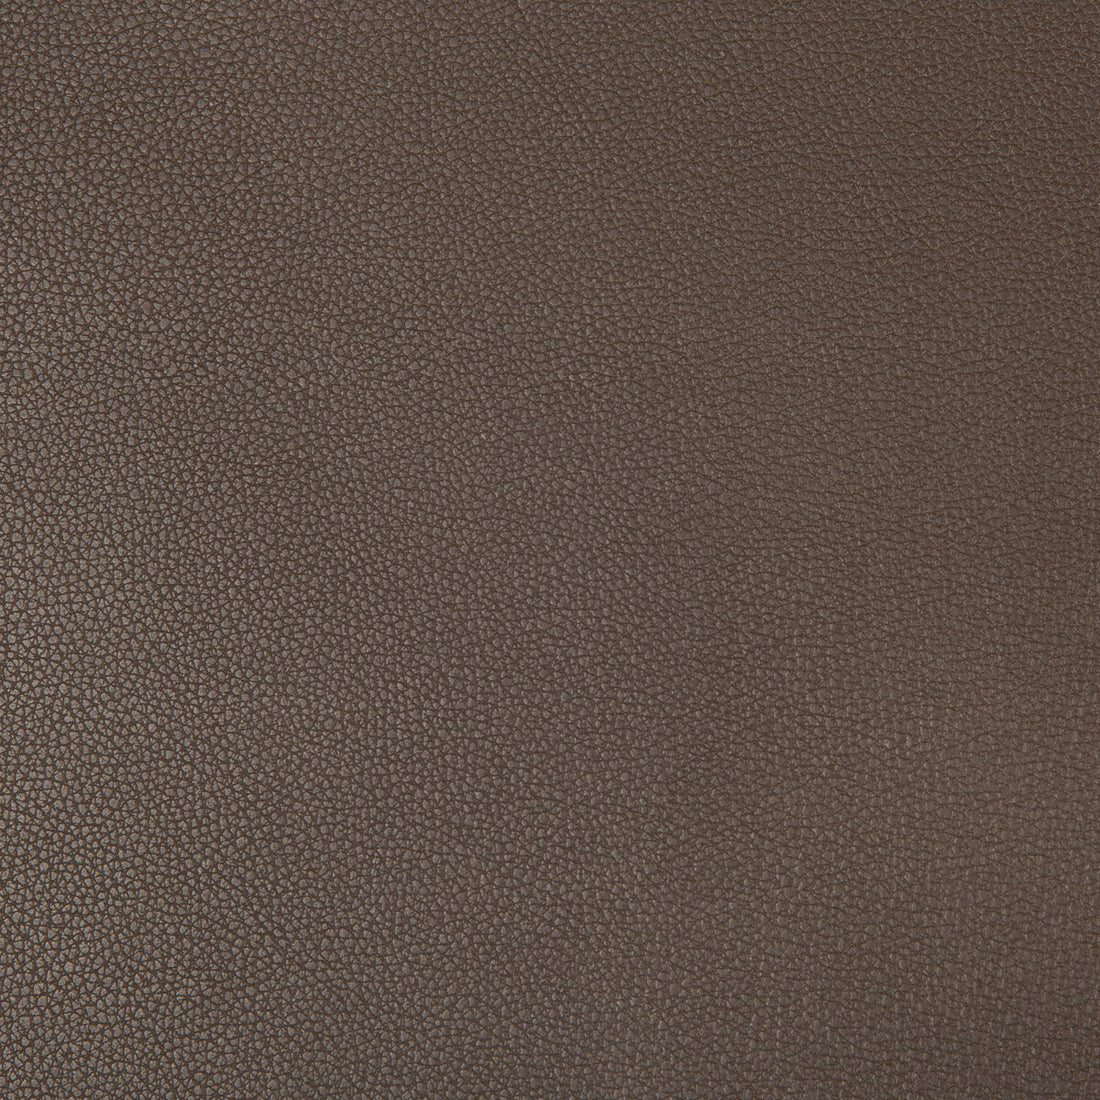 Syrus fabric in espresso color - pattern SYRUS.66.0 - by Kravet Contract